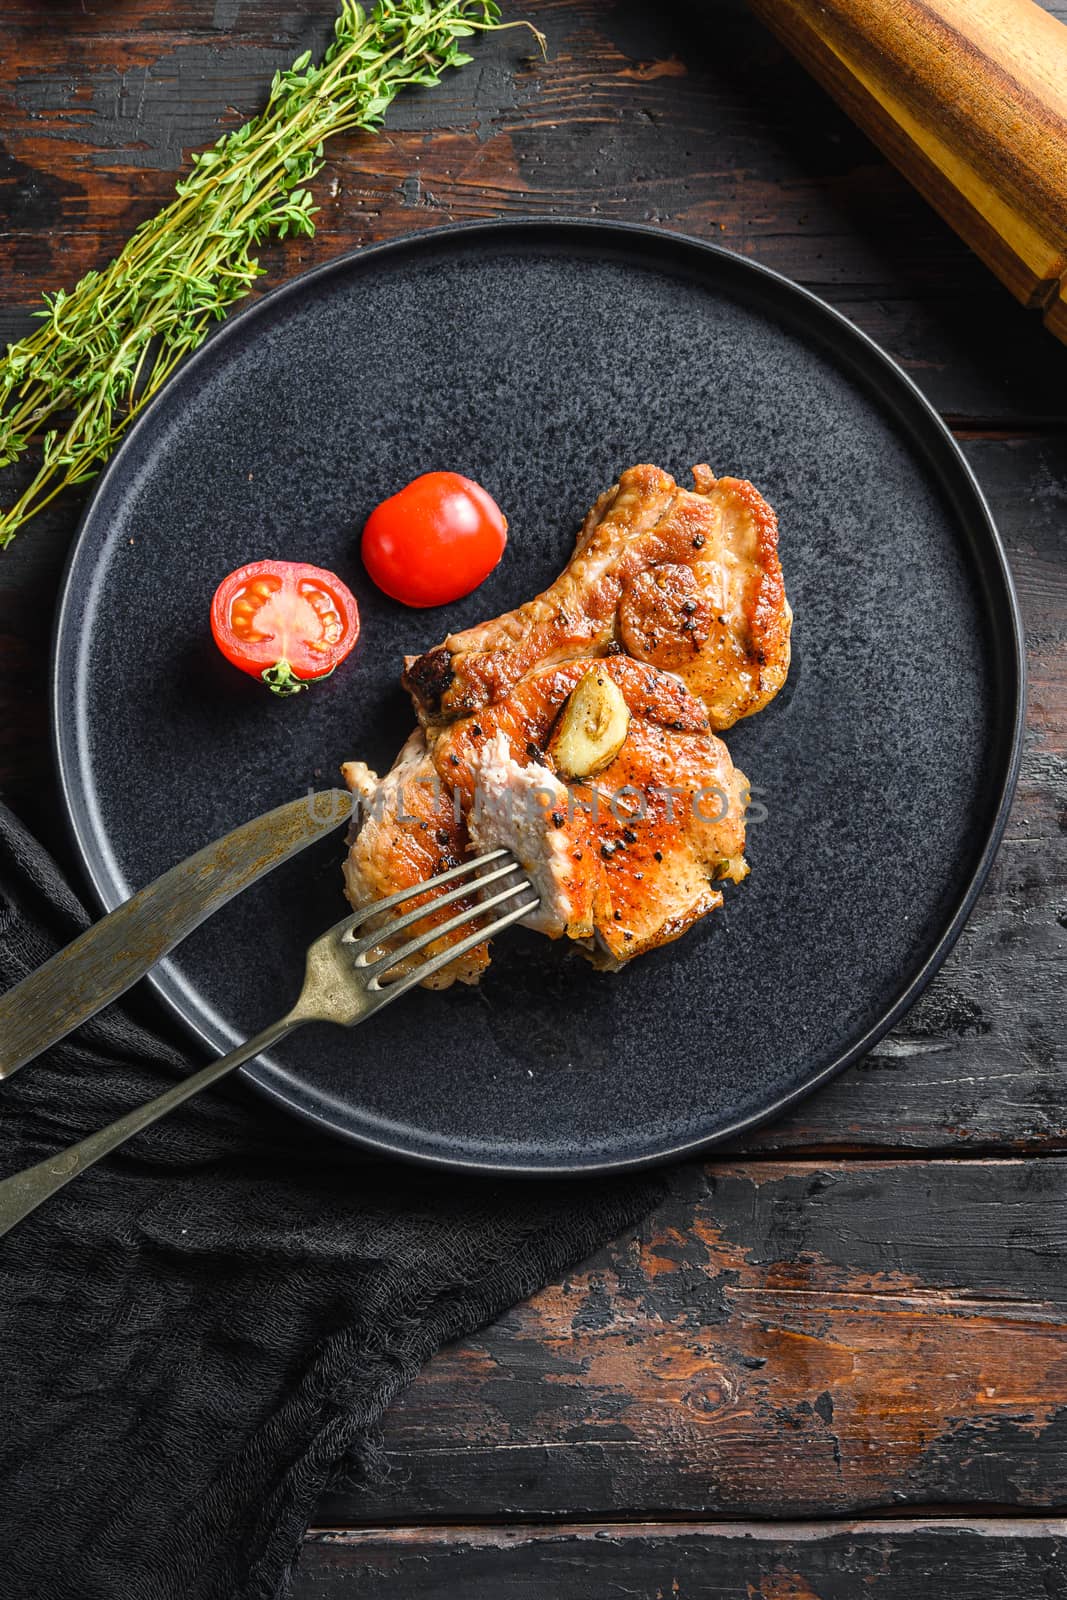 Dish of grilled pork chop with tomatoes top view with knife and slice on fork over old rustic dark wood table table flatlay top view vertical by Ilianesolenyi